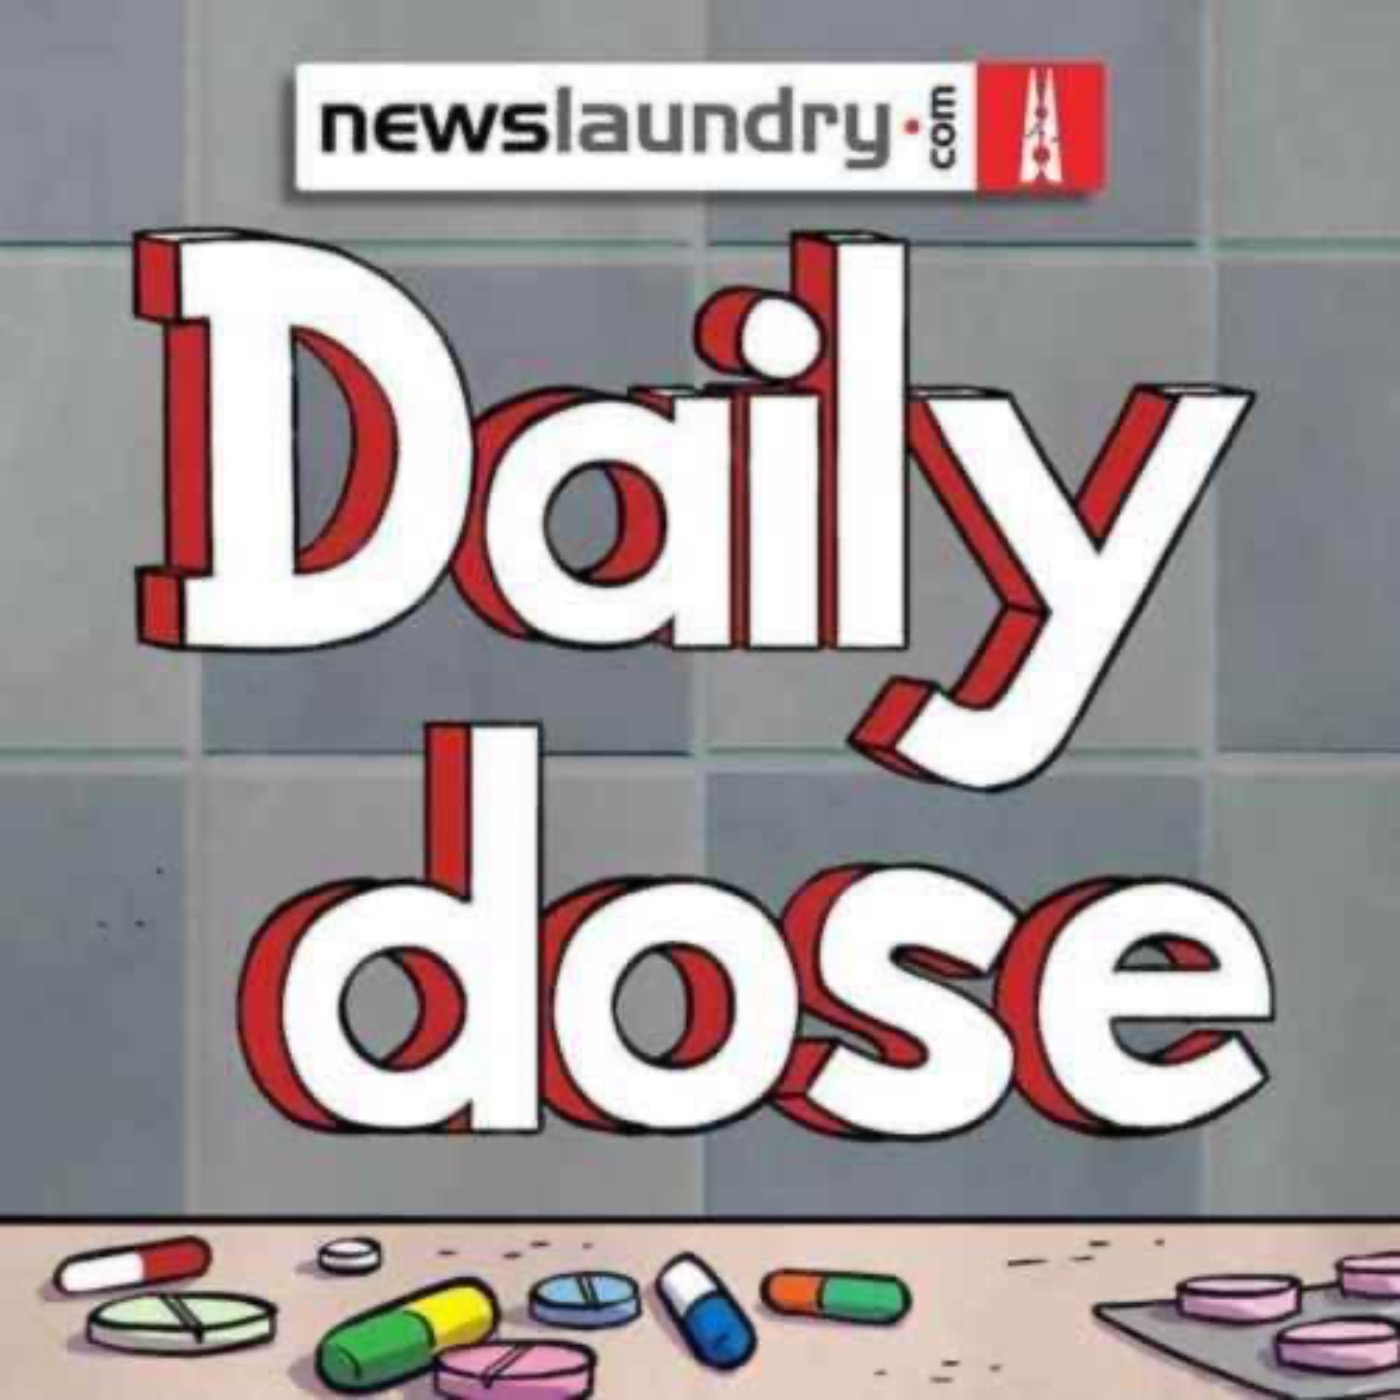 Daily Dose Ep 1530: 15 opposition MPs suspended amid uproar, Mathura mosque dispute